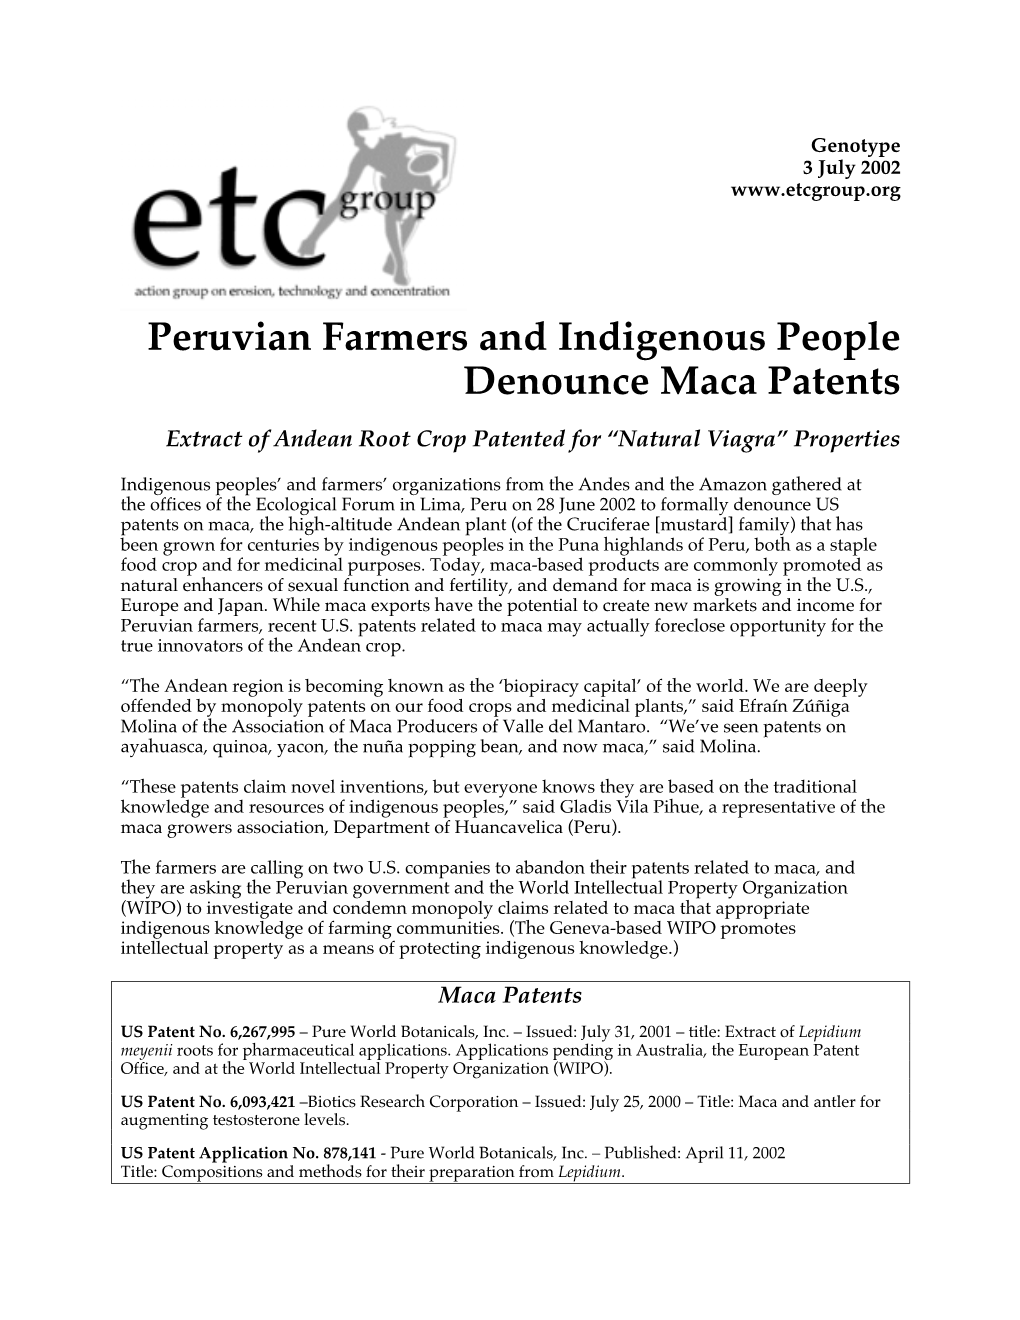 Peruvian Farmers and Indigenous People Denounce Maca Patents